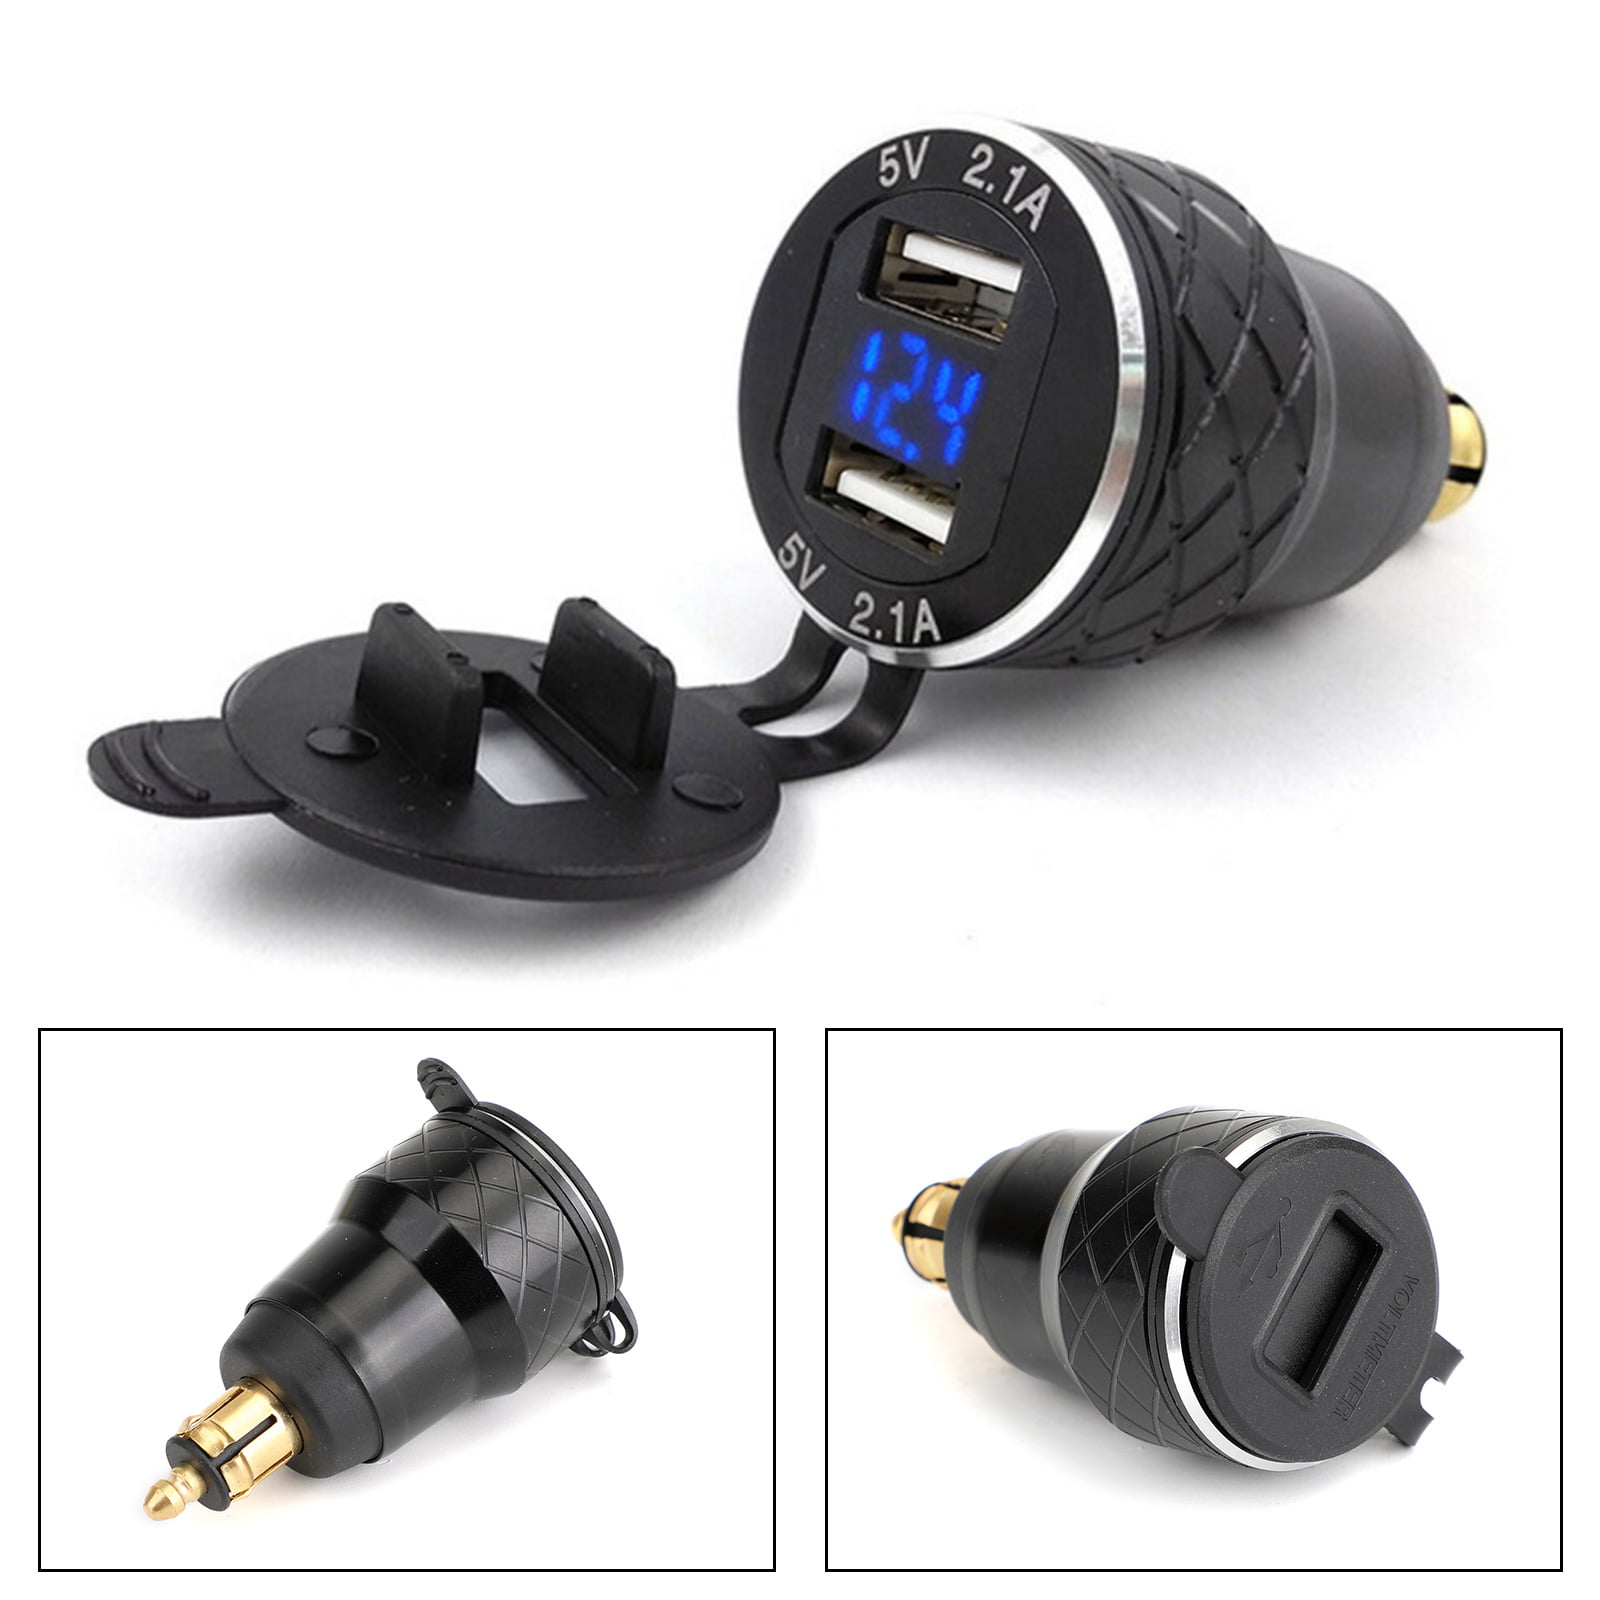 5V 2.1A Dual USB Charger Socket Power Adapter LED Voltmeter For BMW Motorcycle